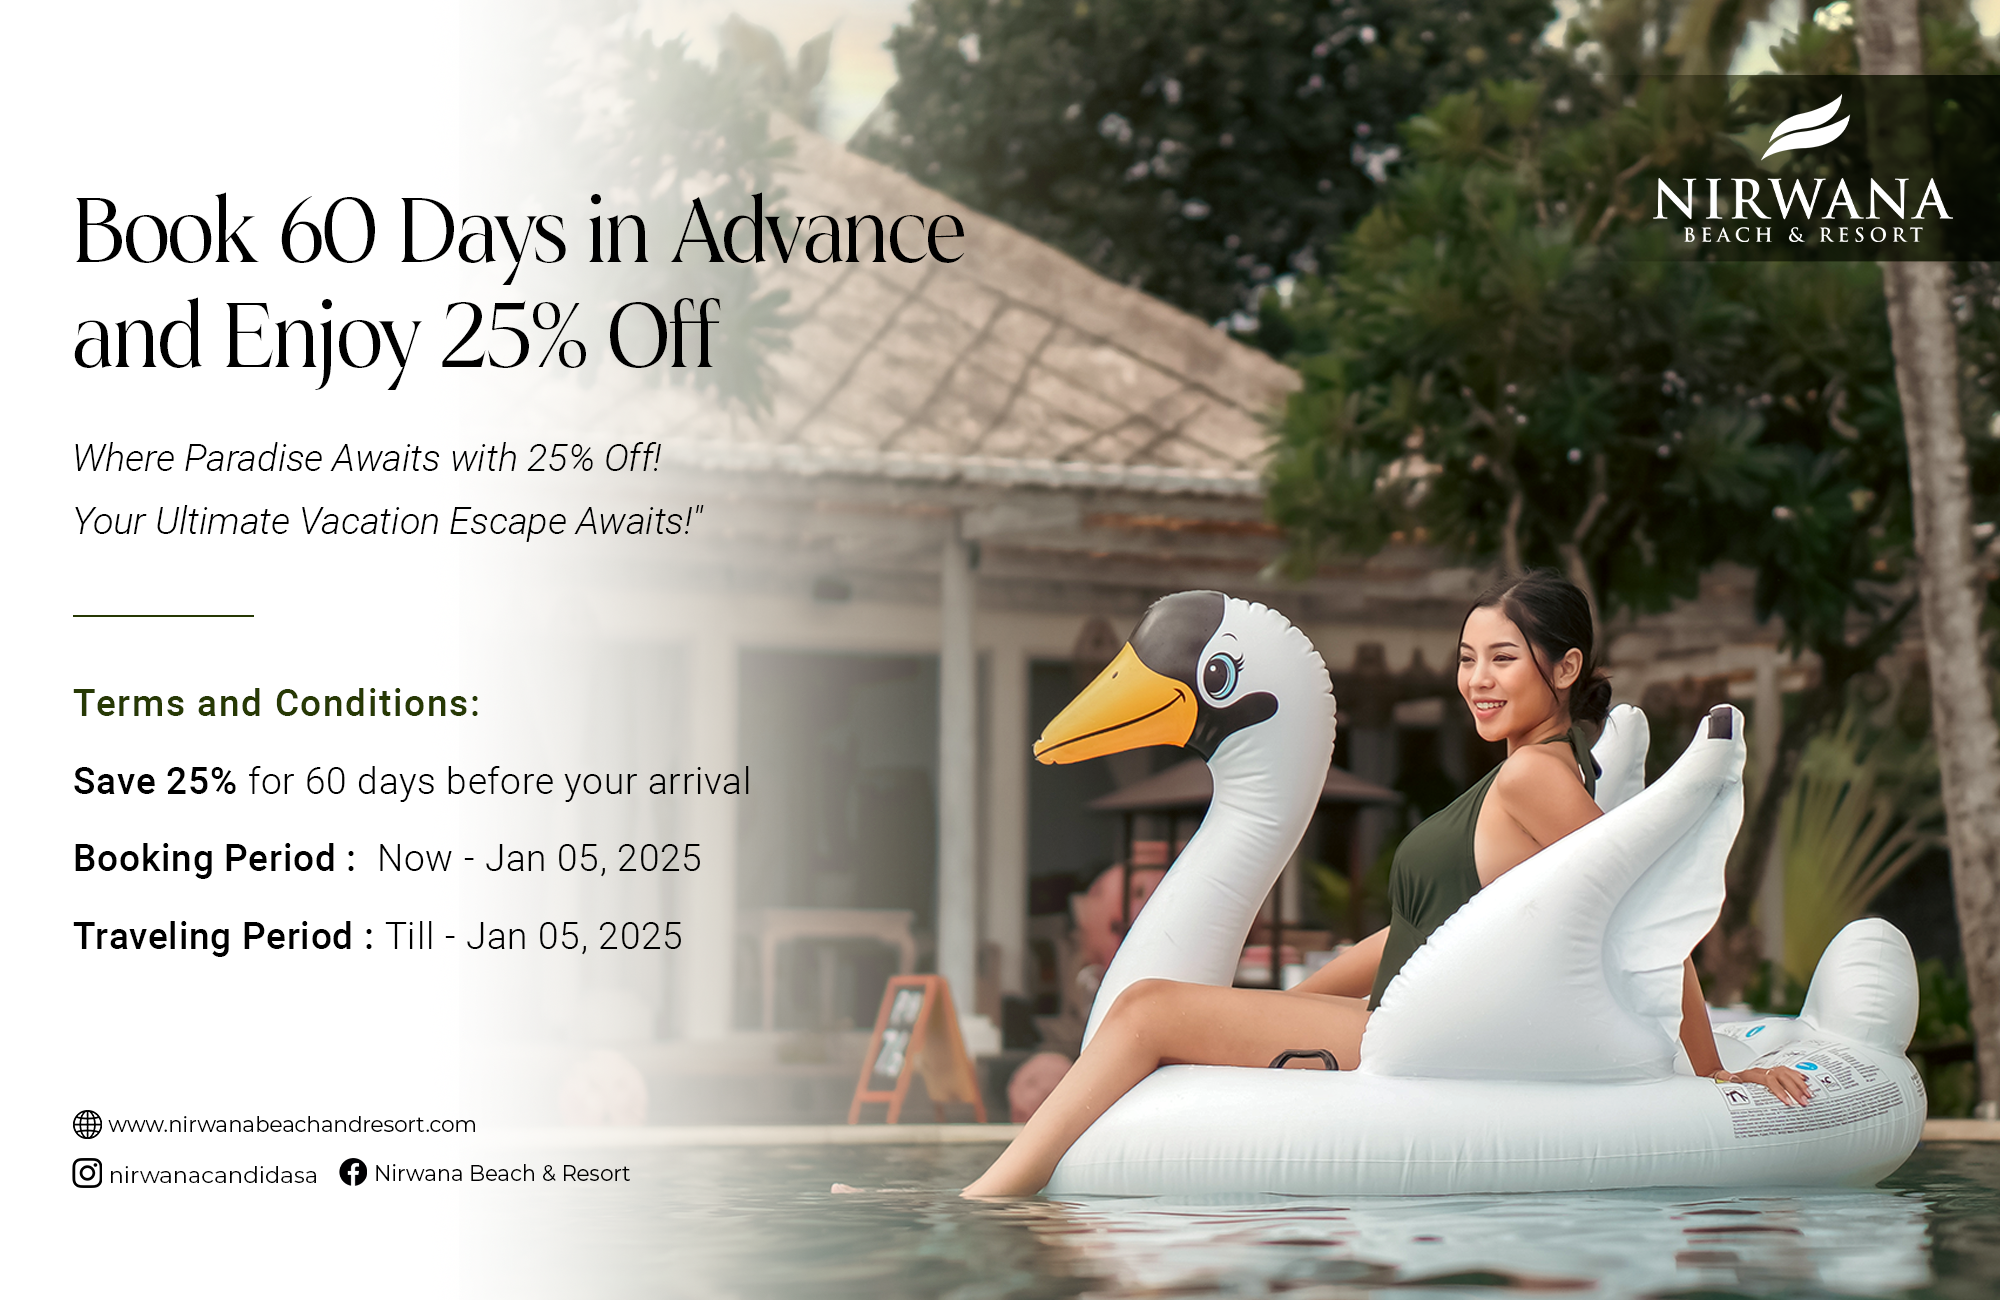 Book 60 Days in Advance and Enjoy 25% Off